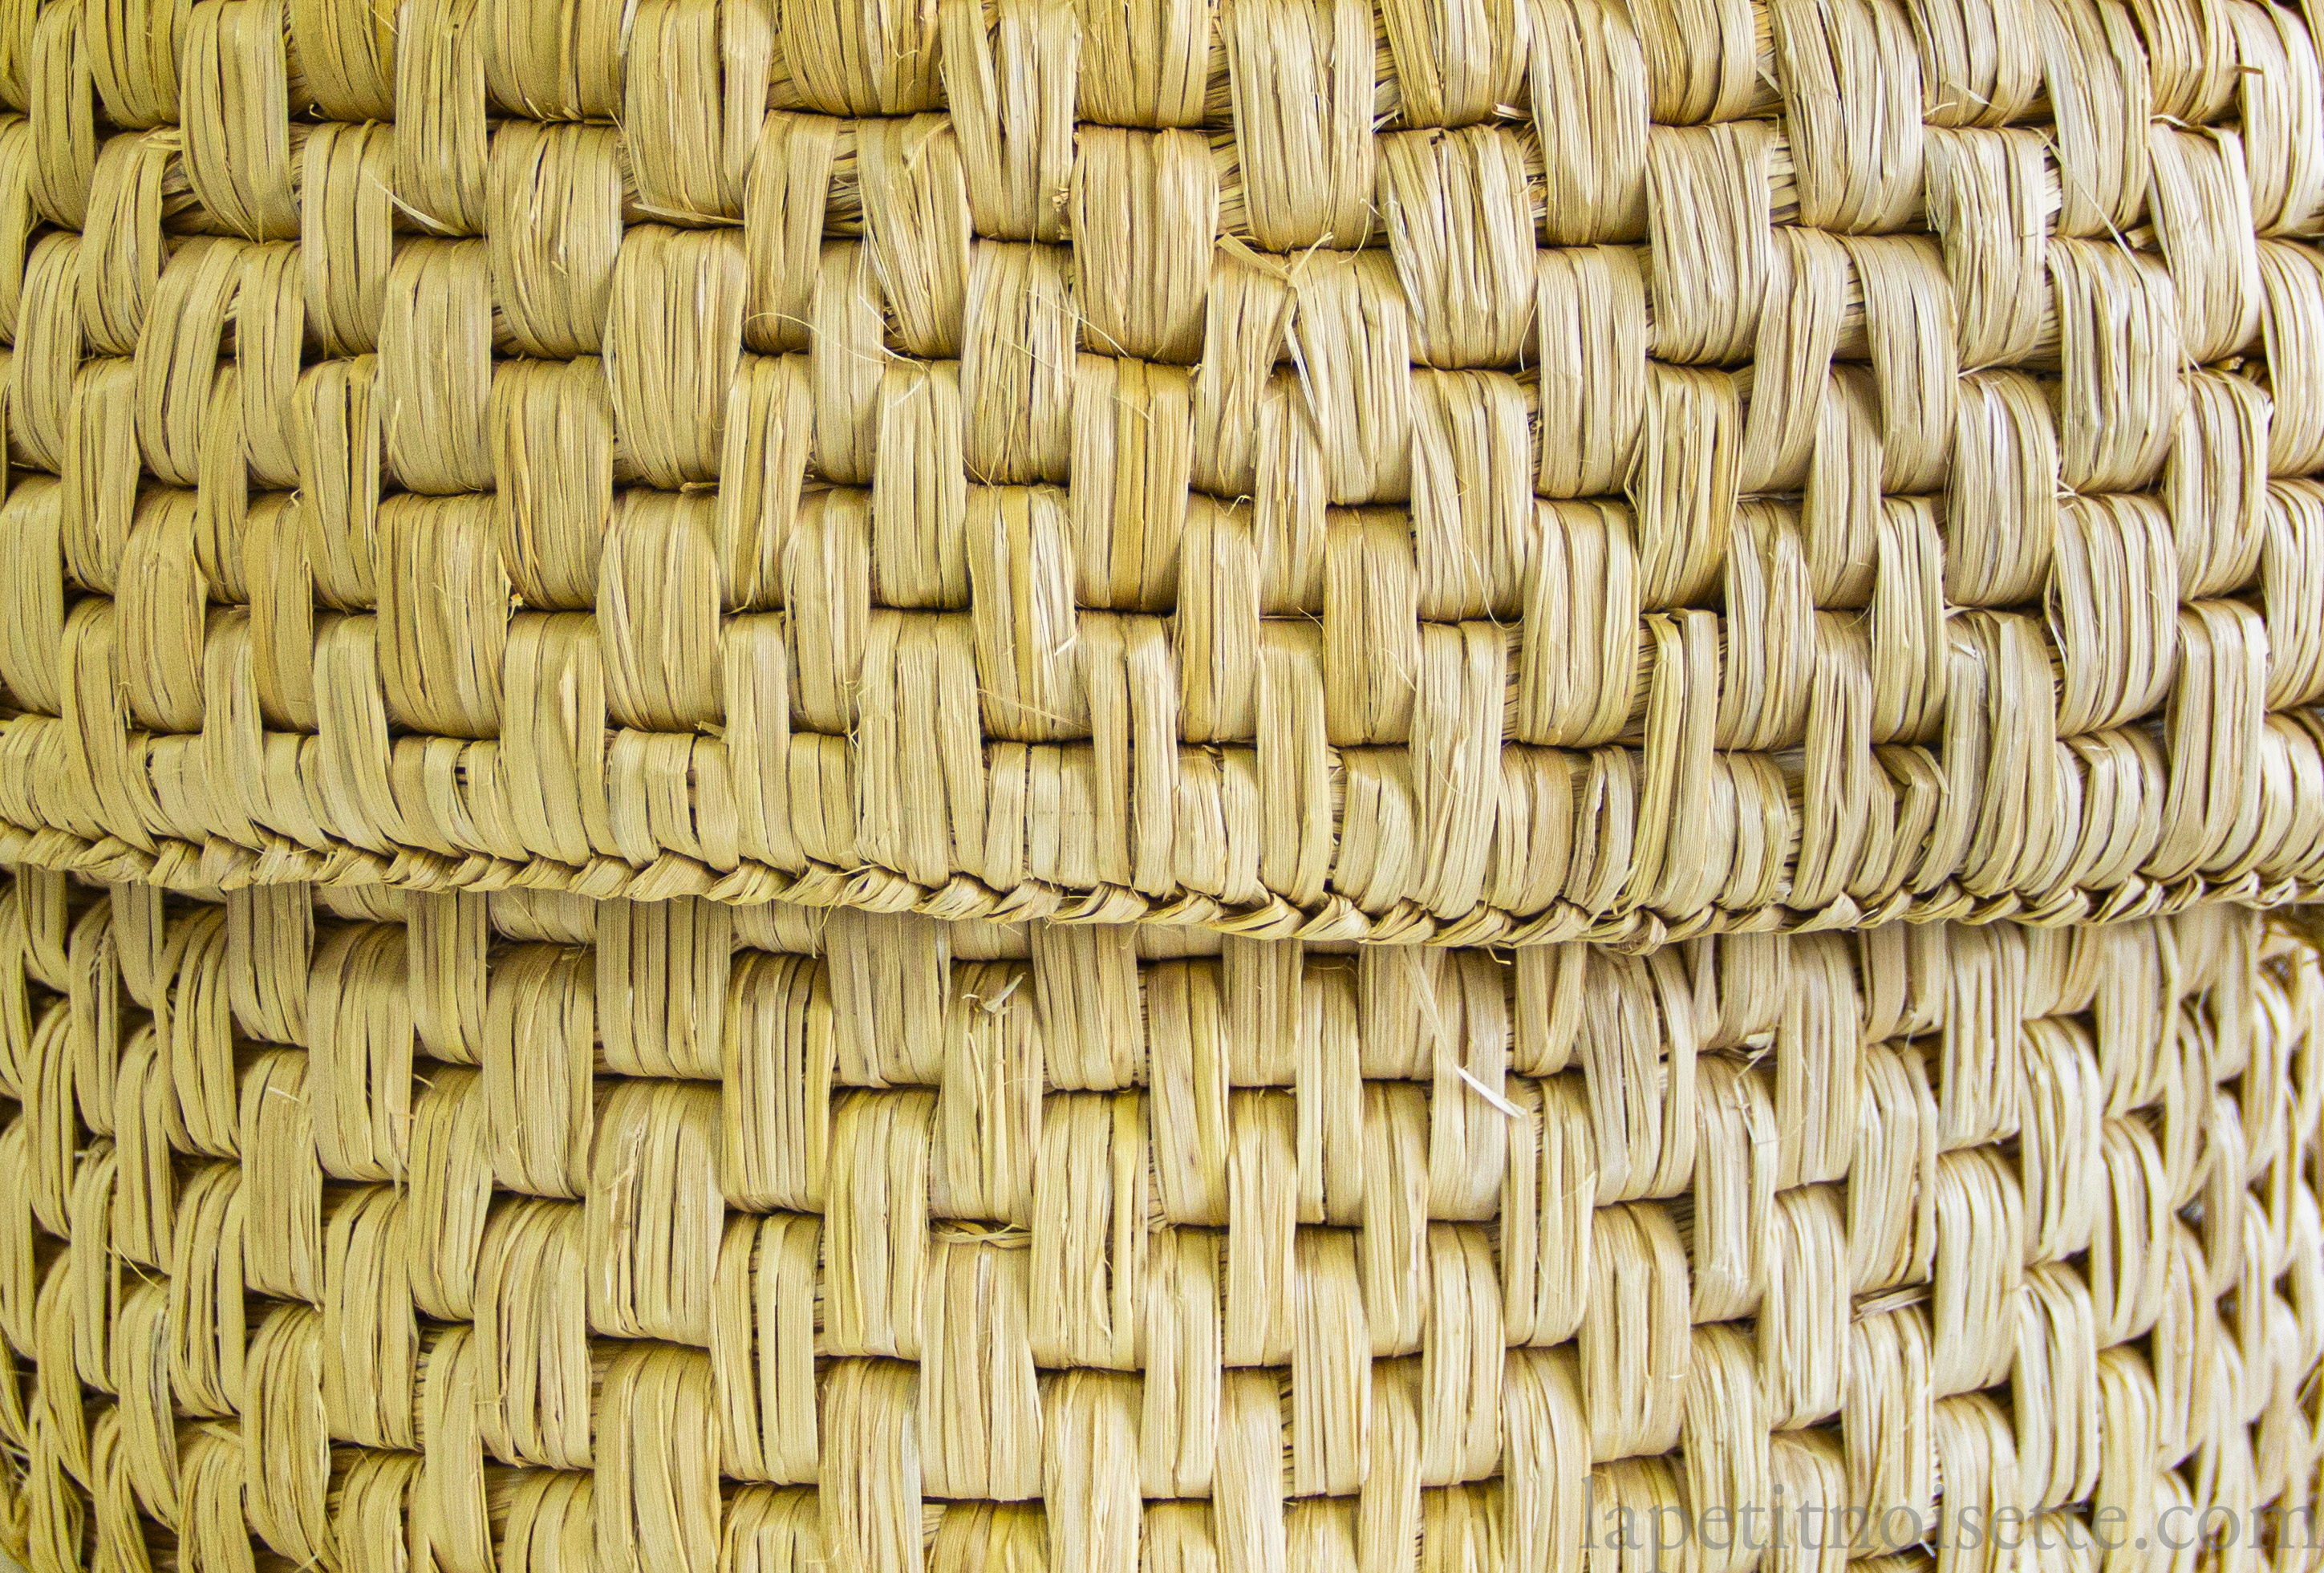 A close up of traditional japanese straw basket know as a warabitsu used to keep rice warm.